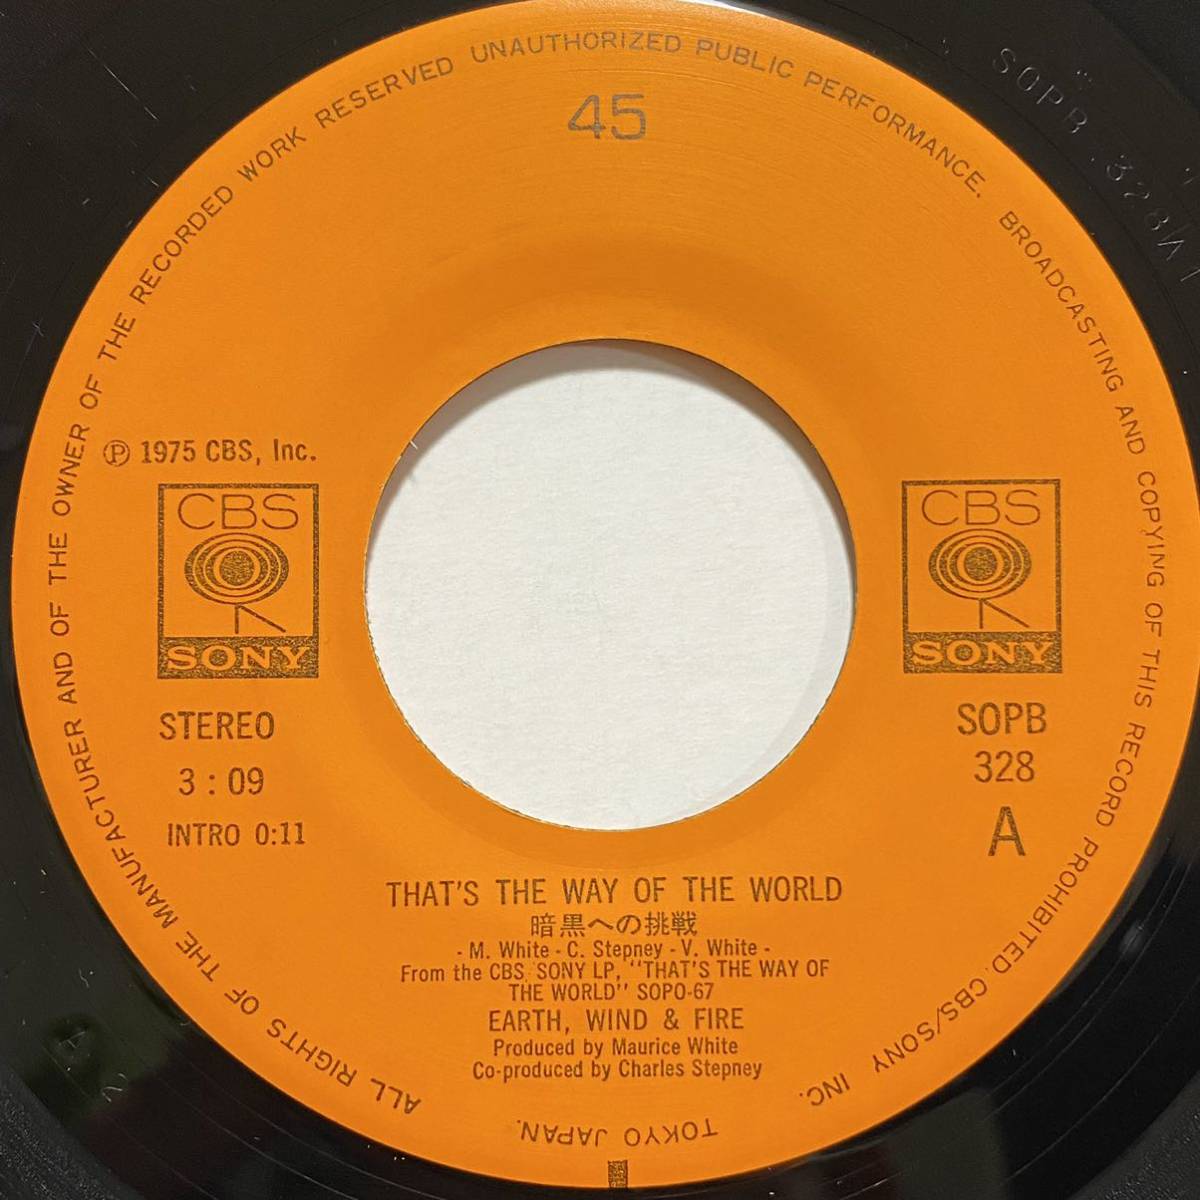 EARTH WIND & FIRE That's the Way of the World 暗黒への挑戦 Africano 7inch 7インチ EP 国内盤 ネタ アース ウインド & ファイアー_画像2